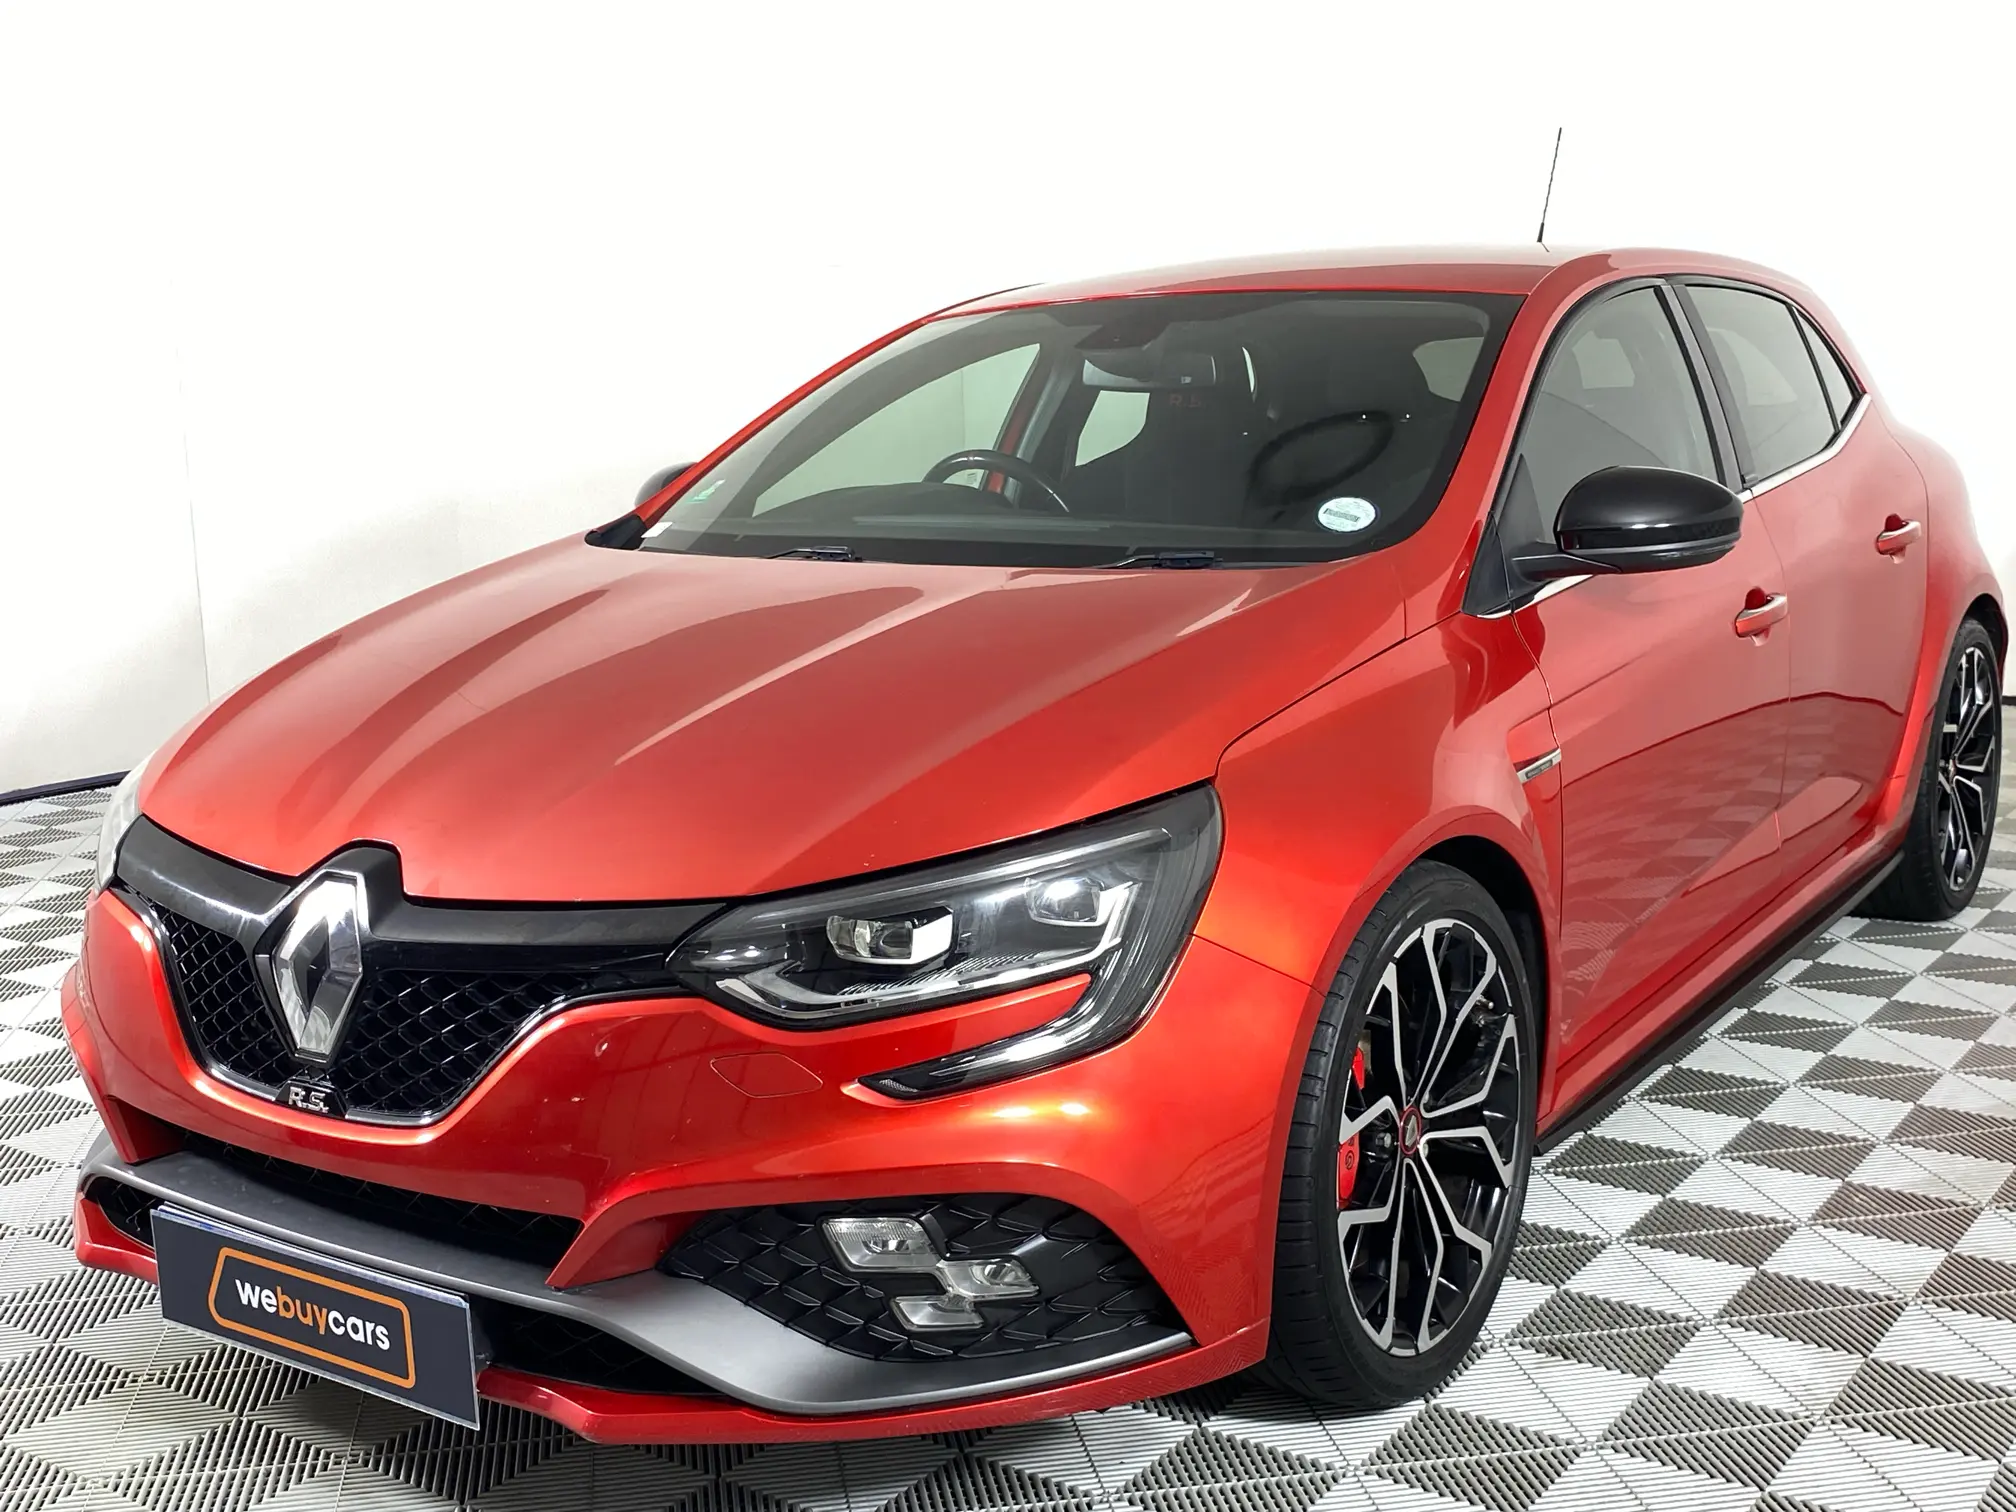 2019 Renault Megane RS RS 280 CUP (5dr)